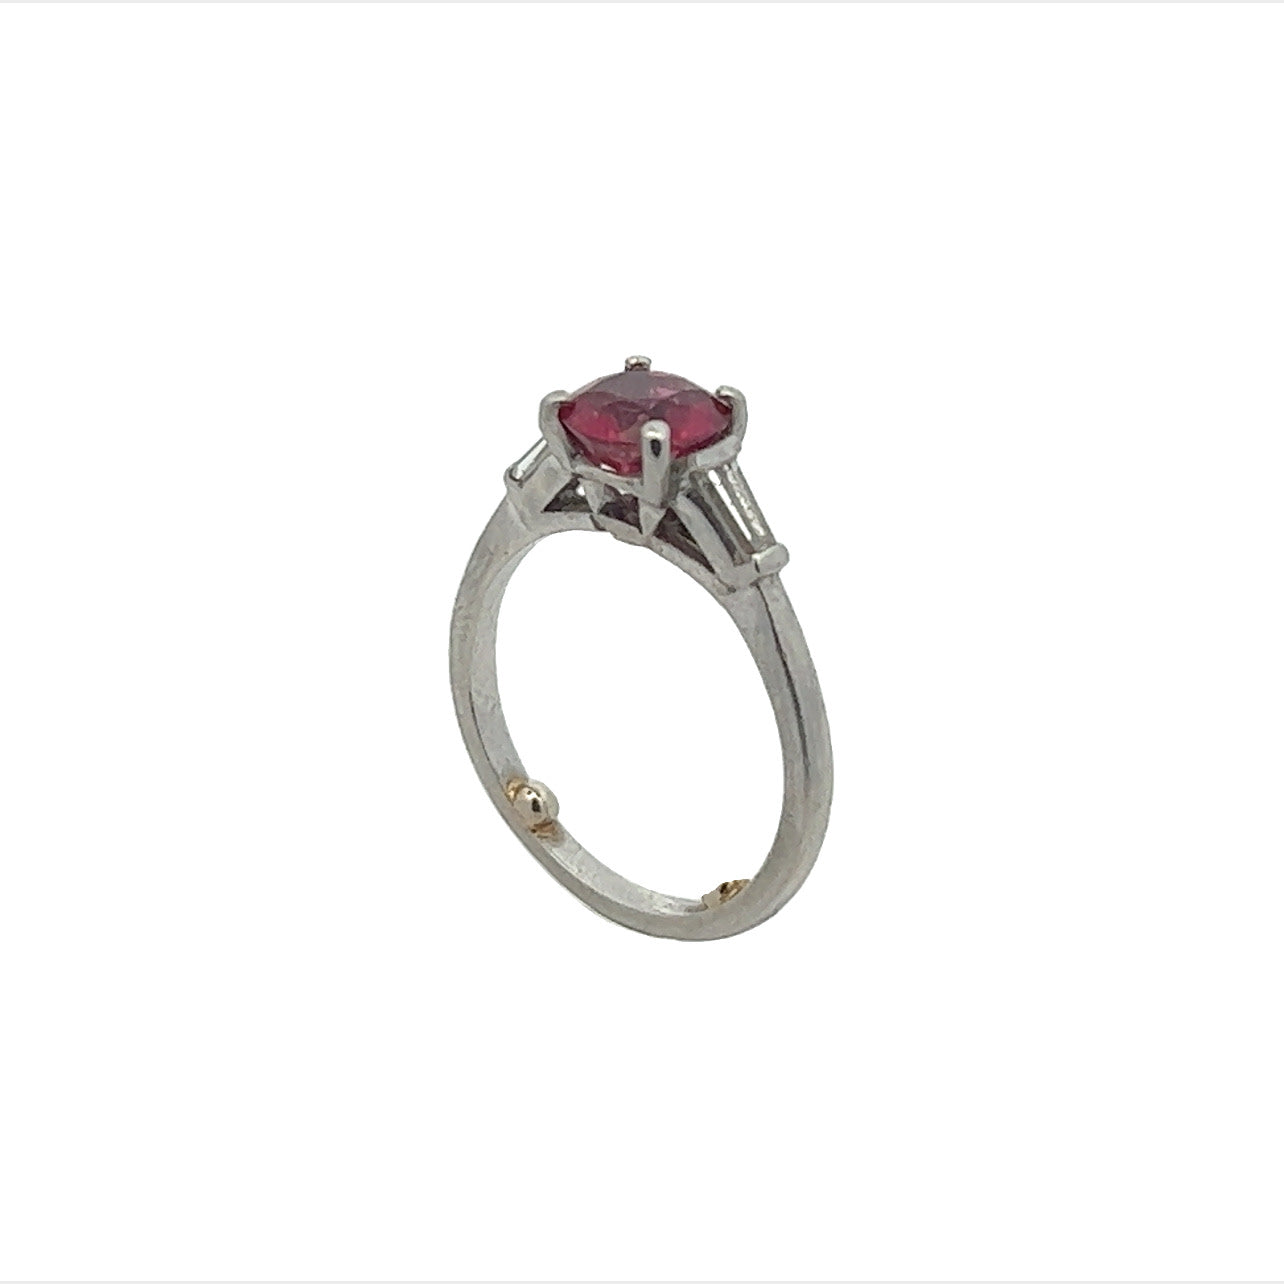 1970s Platinum Pink Sapphire & Diamond Ring side and top